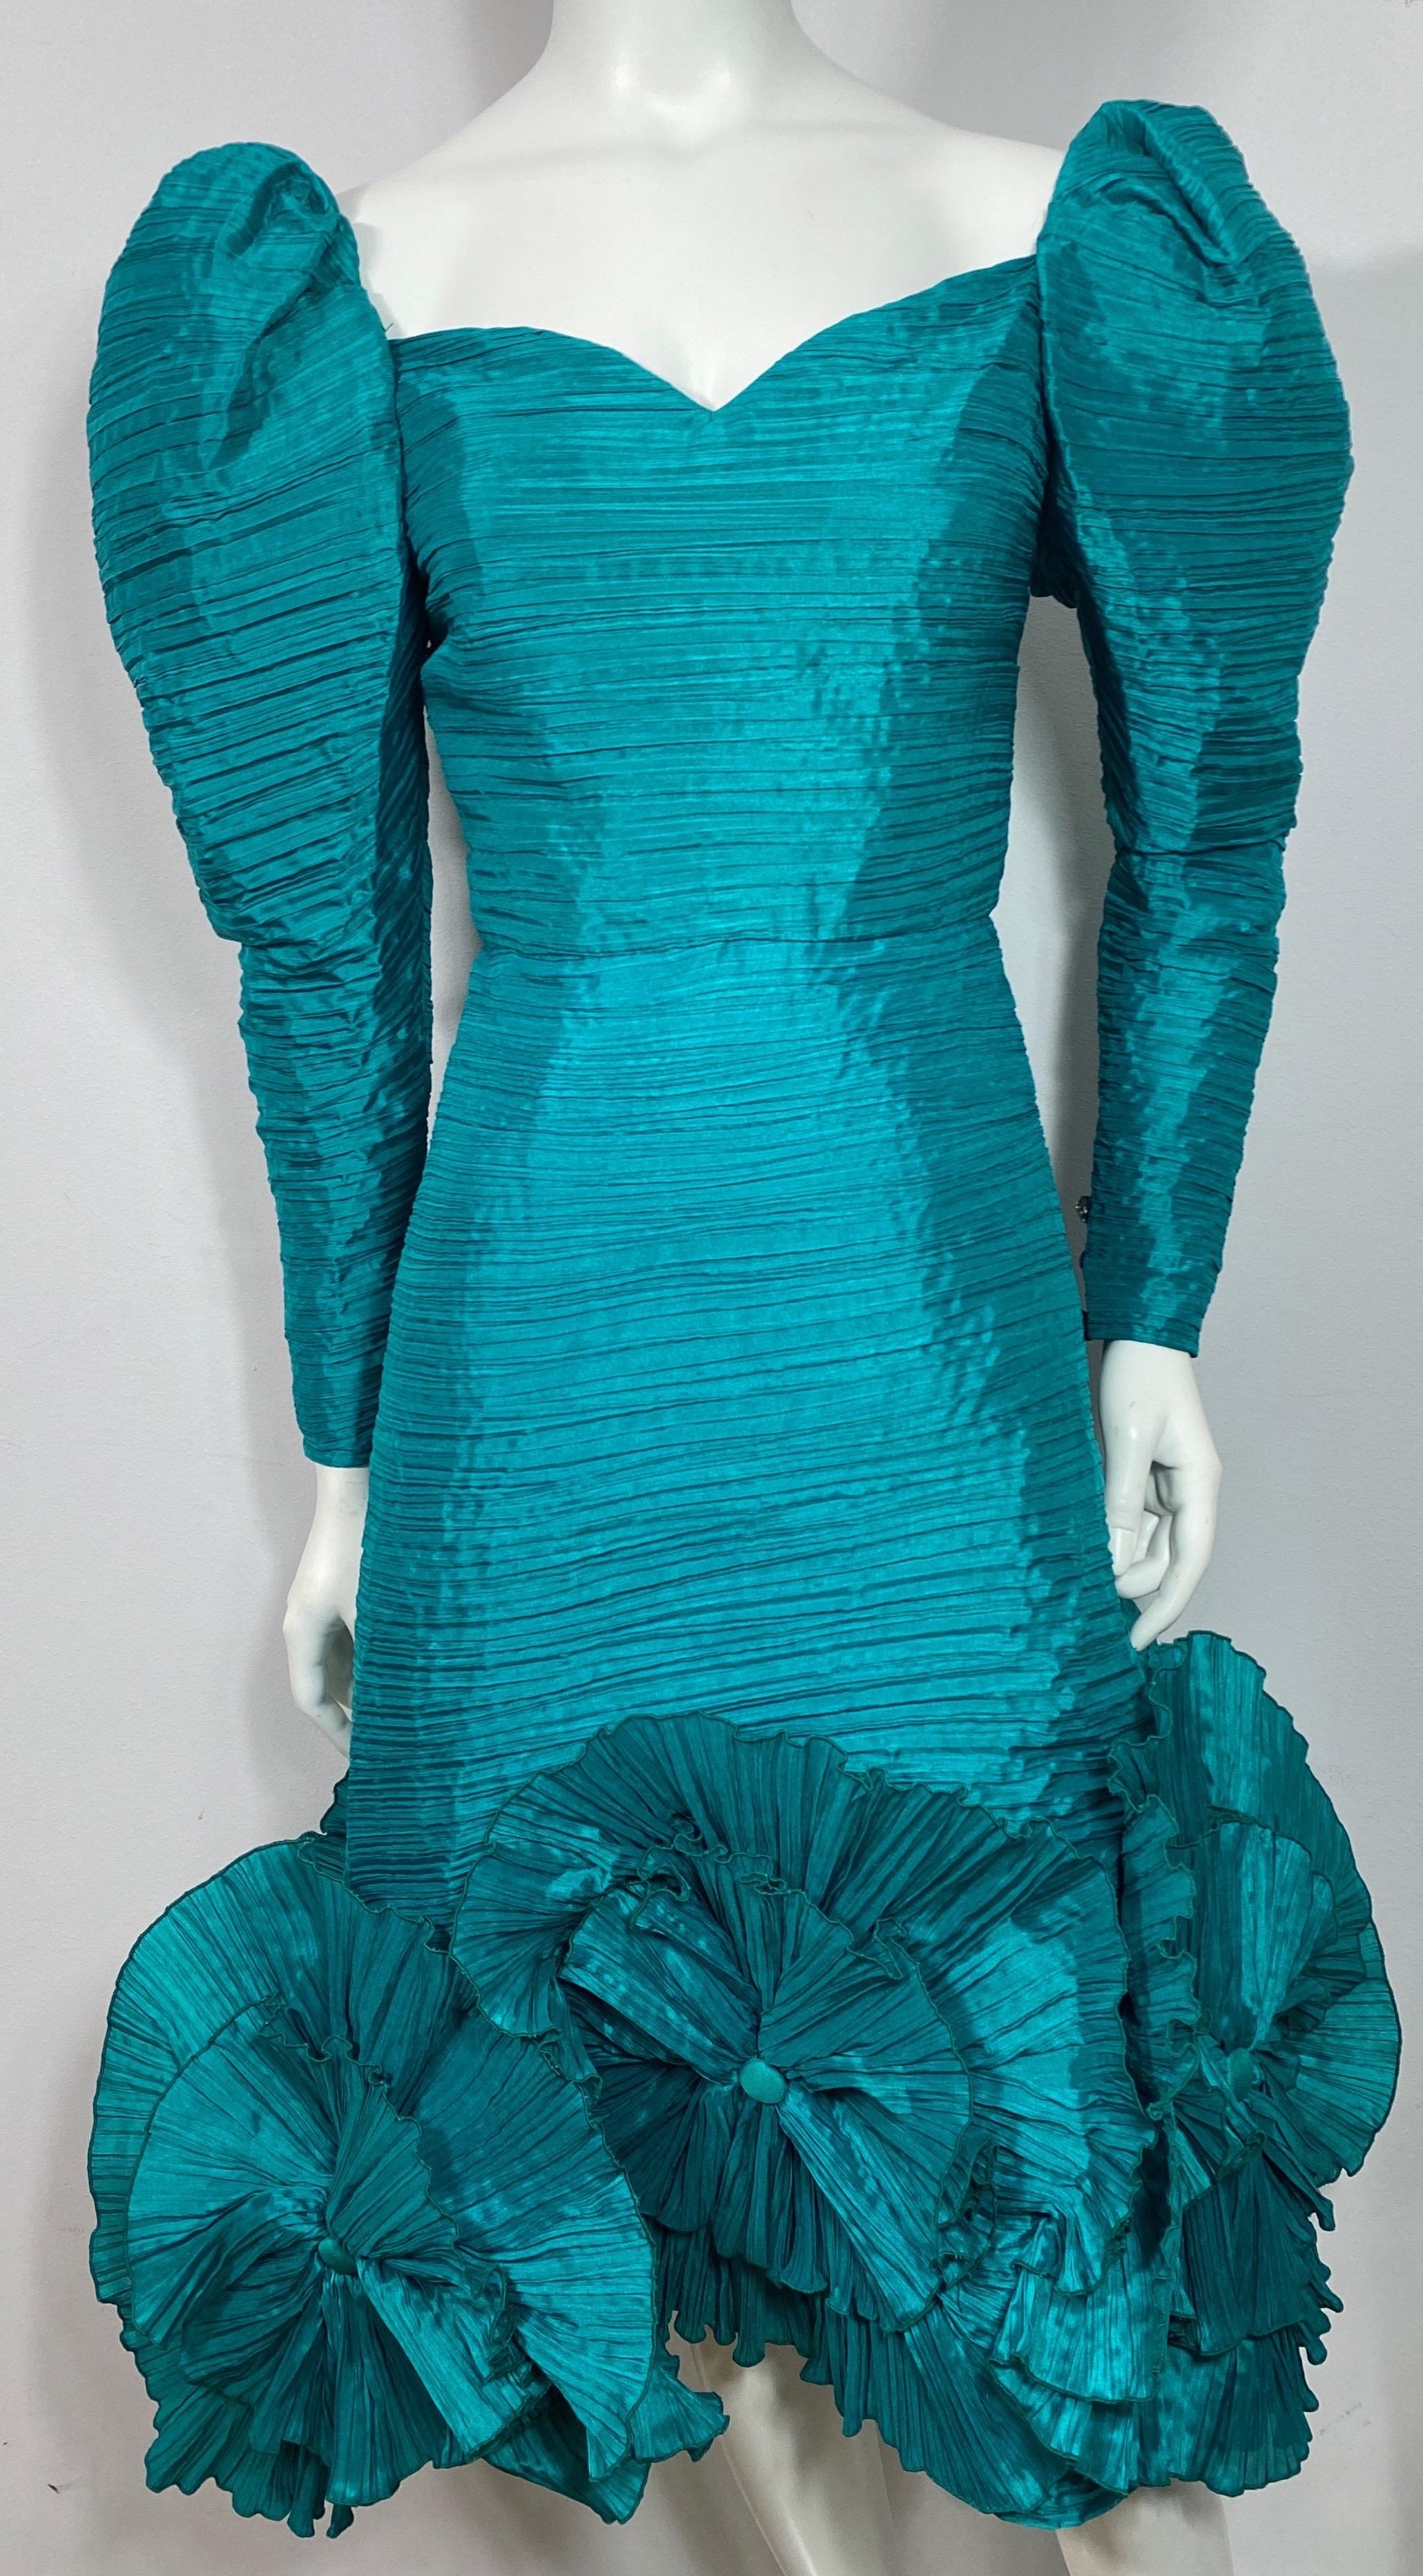 Richilene 1990’s Emerald Green Pleated Silk Dress-Size 4. This 1990’s Richilene creation is made of a fabulous emerald green pleated silk taffeta, has a sweetheart neckline, Balloon sleeves that narrow towards the wrist with 3 rhinestone buttons.